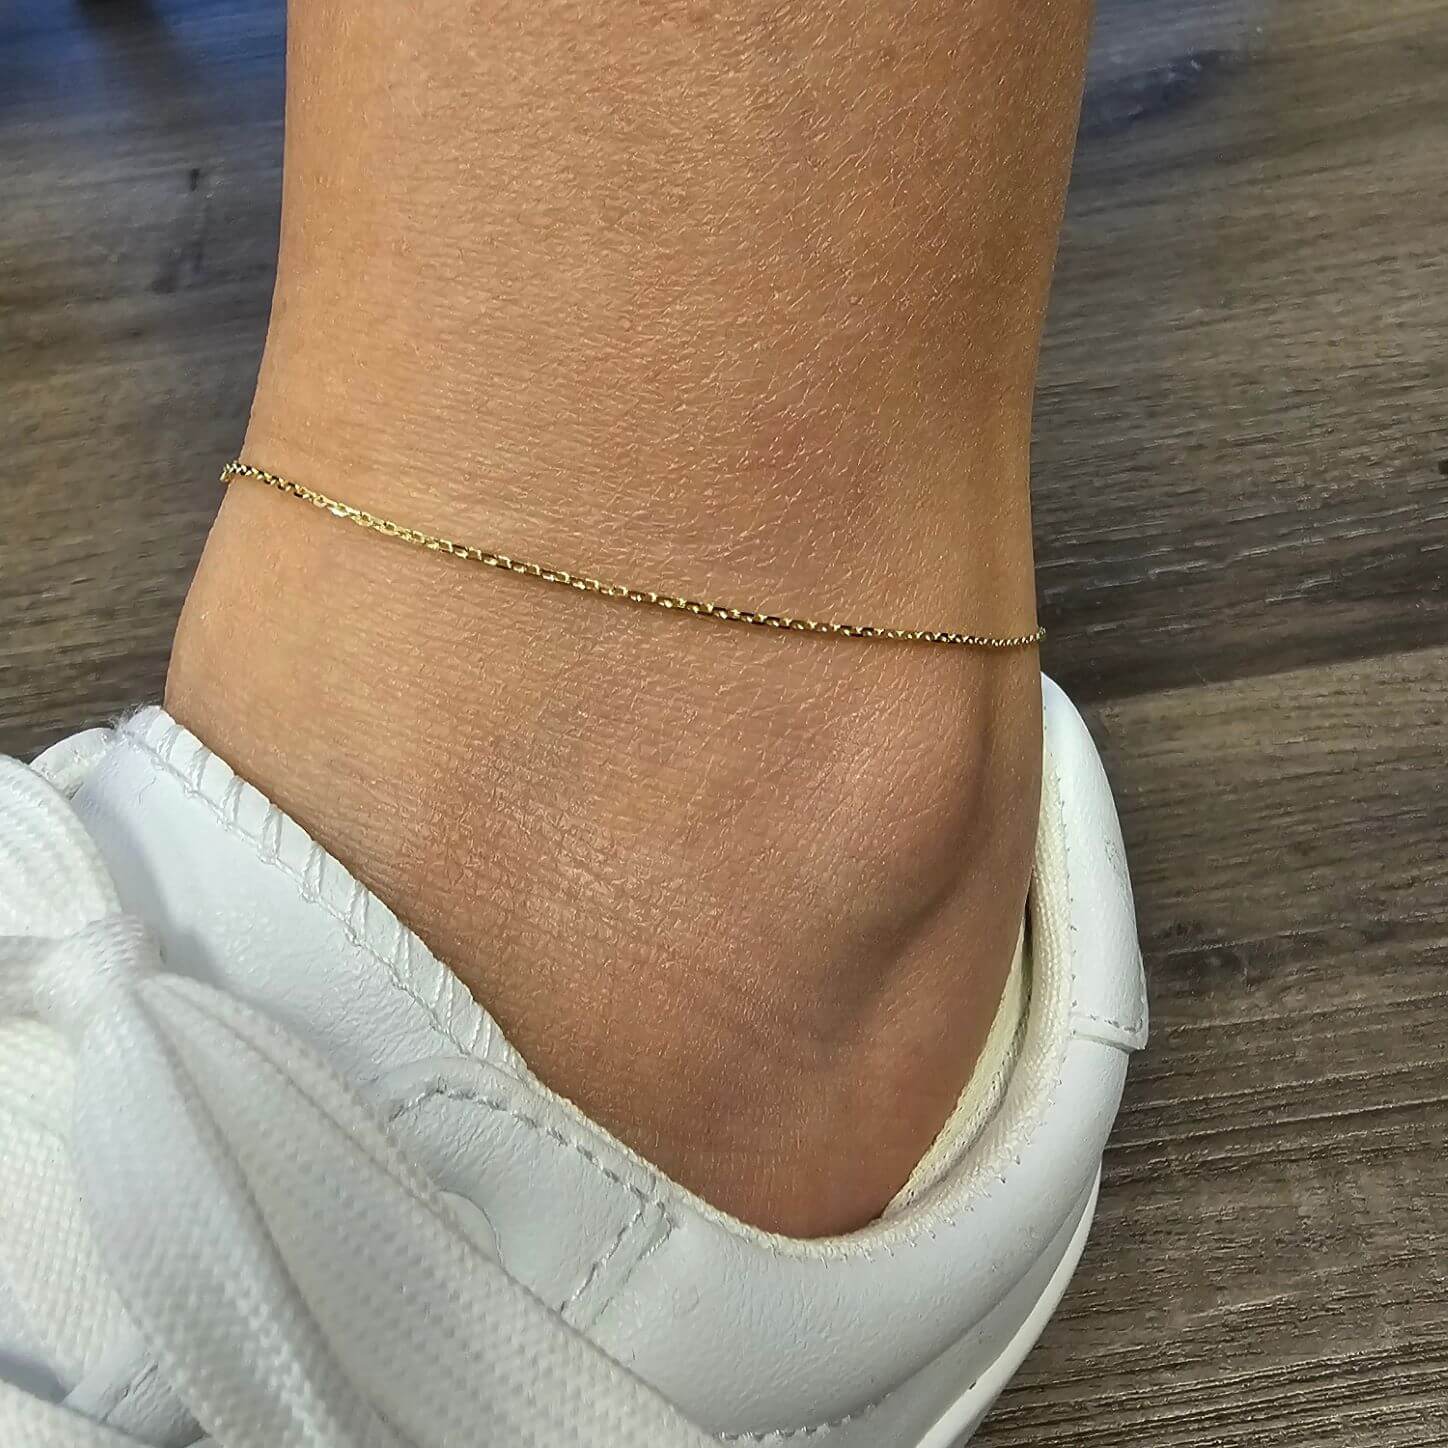 Solid 14k yellow gold permanent anklet done by Amanda